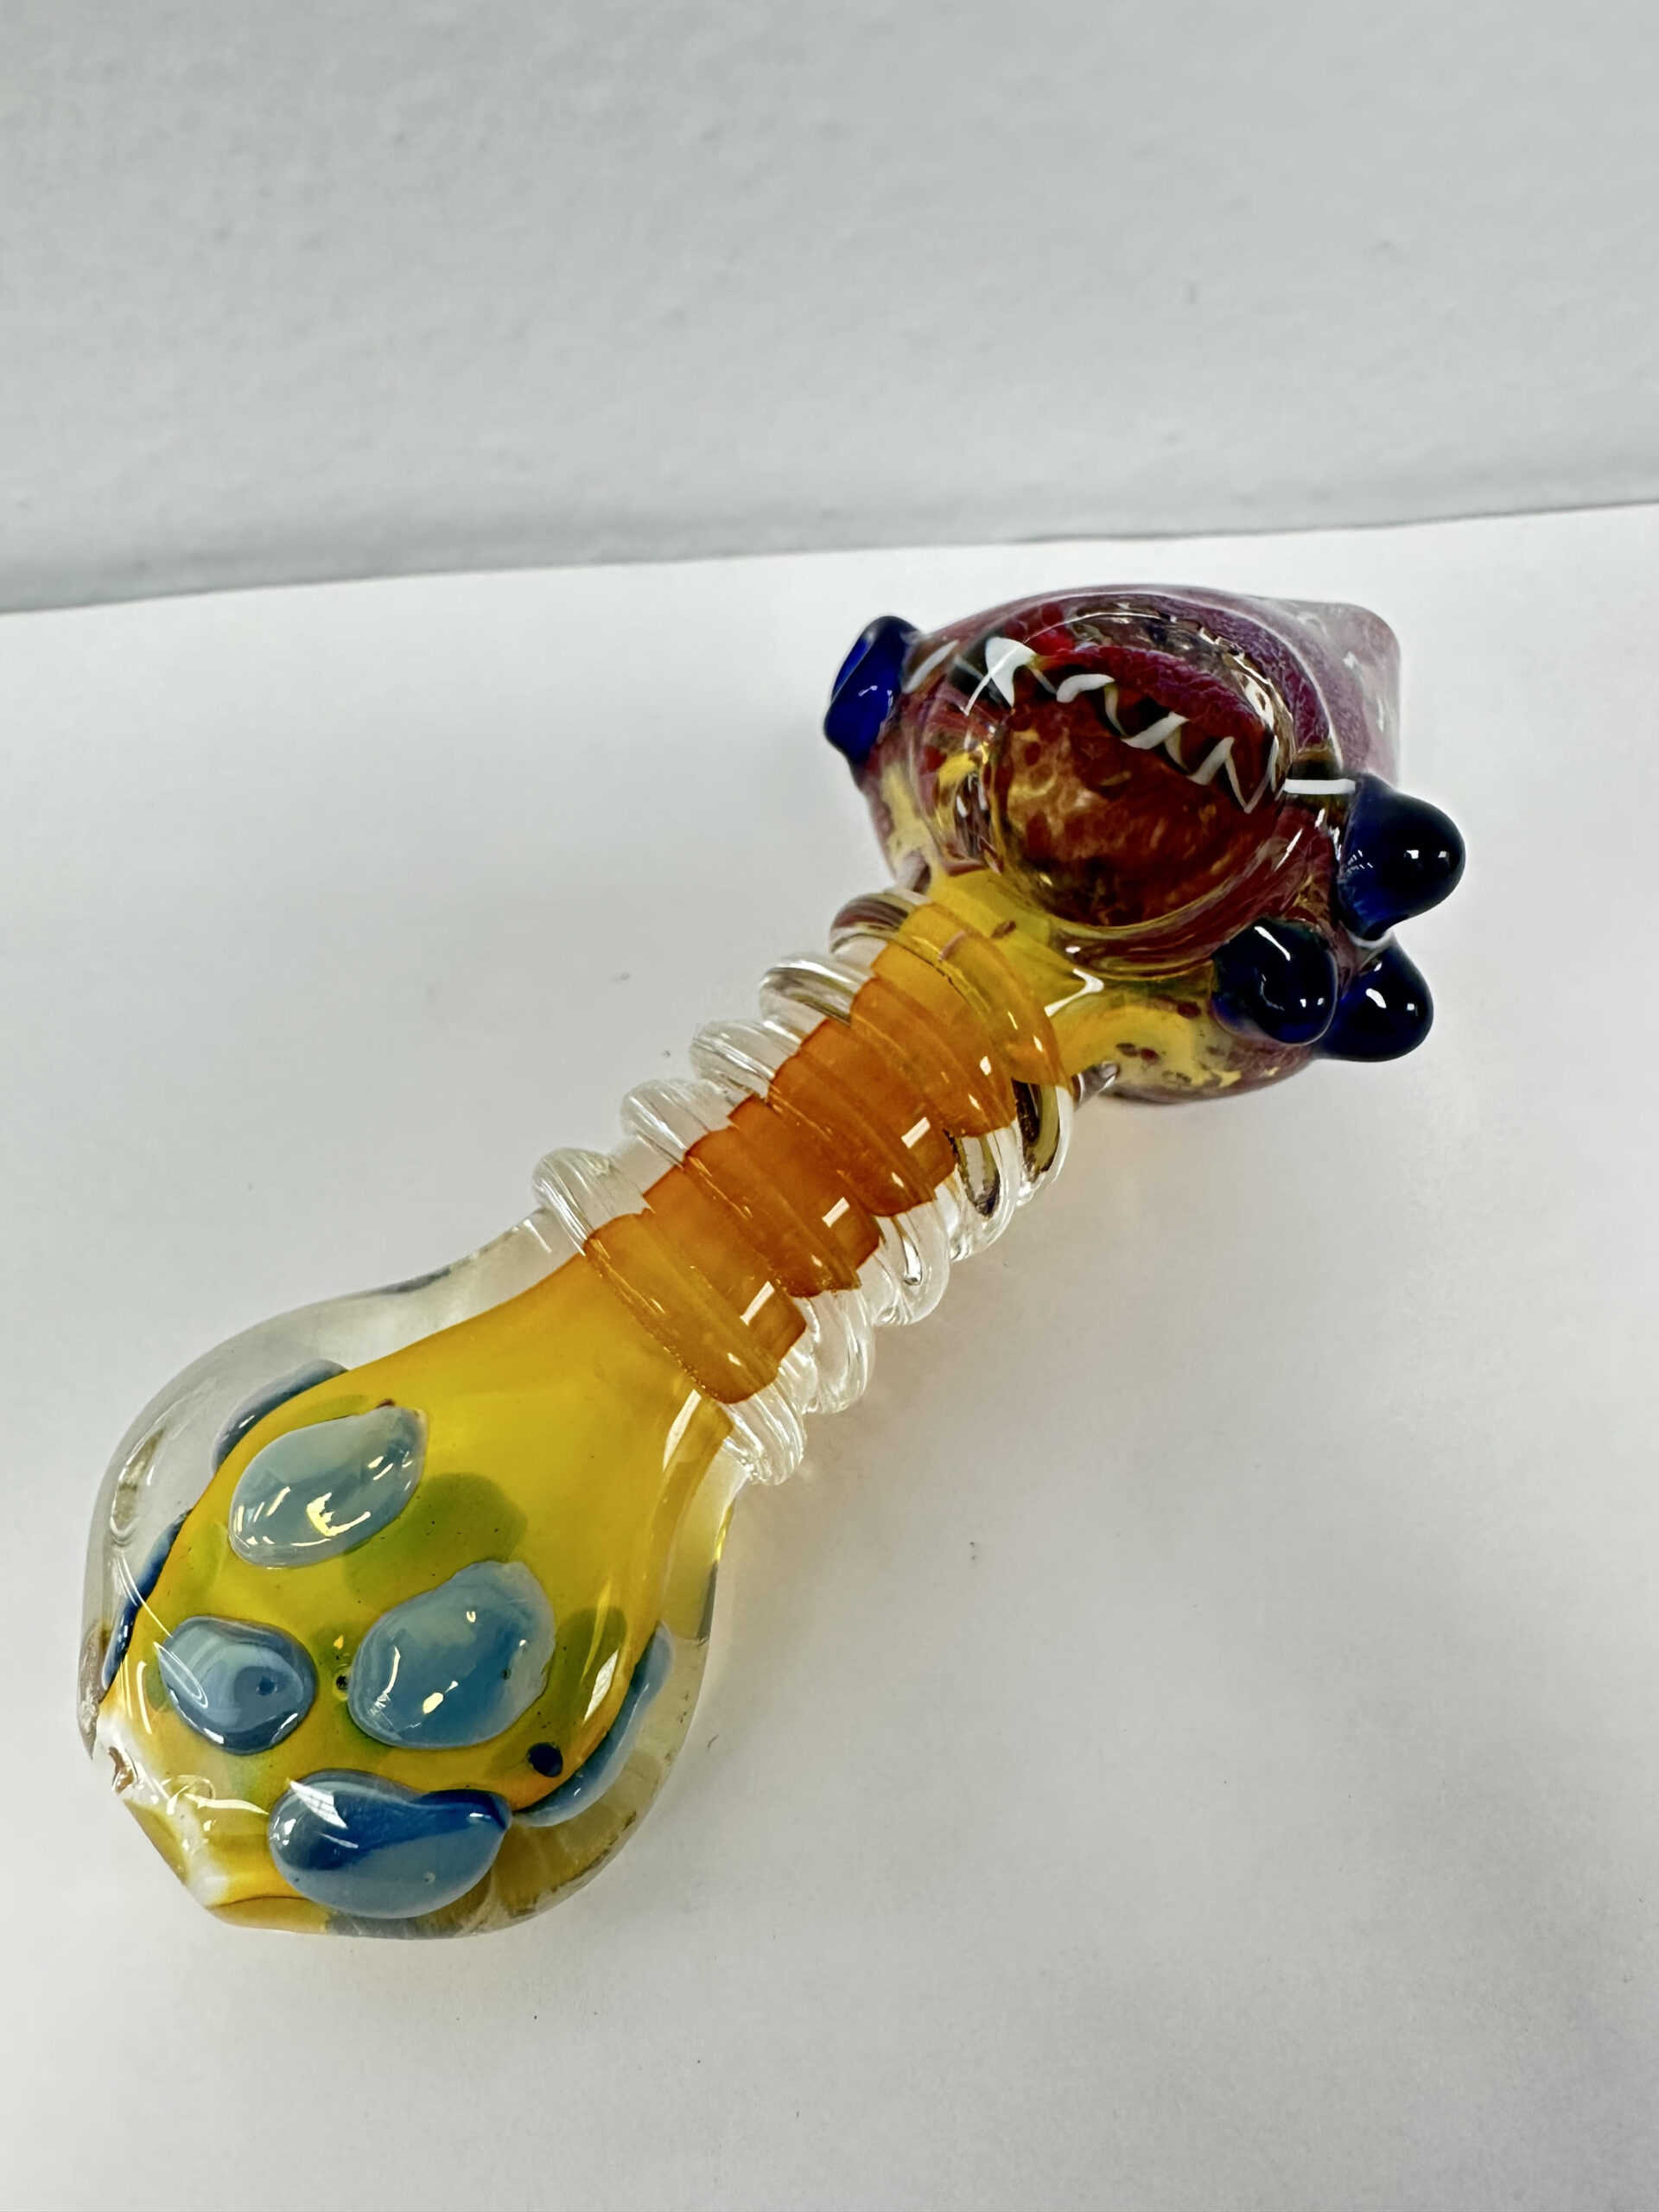  What is the difference between a hand pipe and a water pipe?